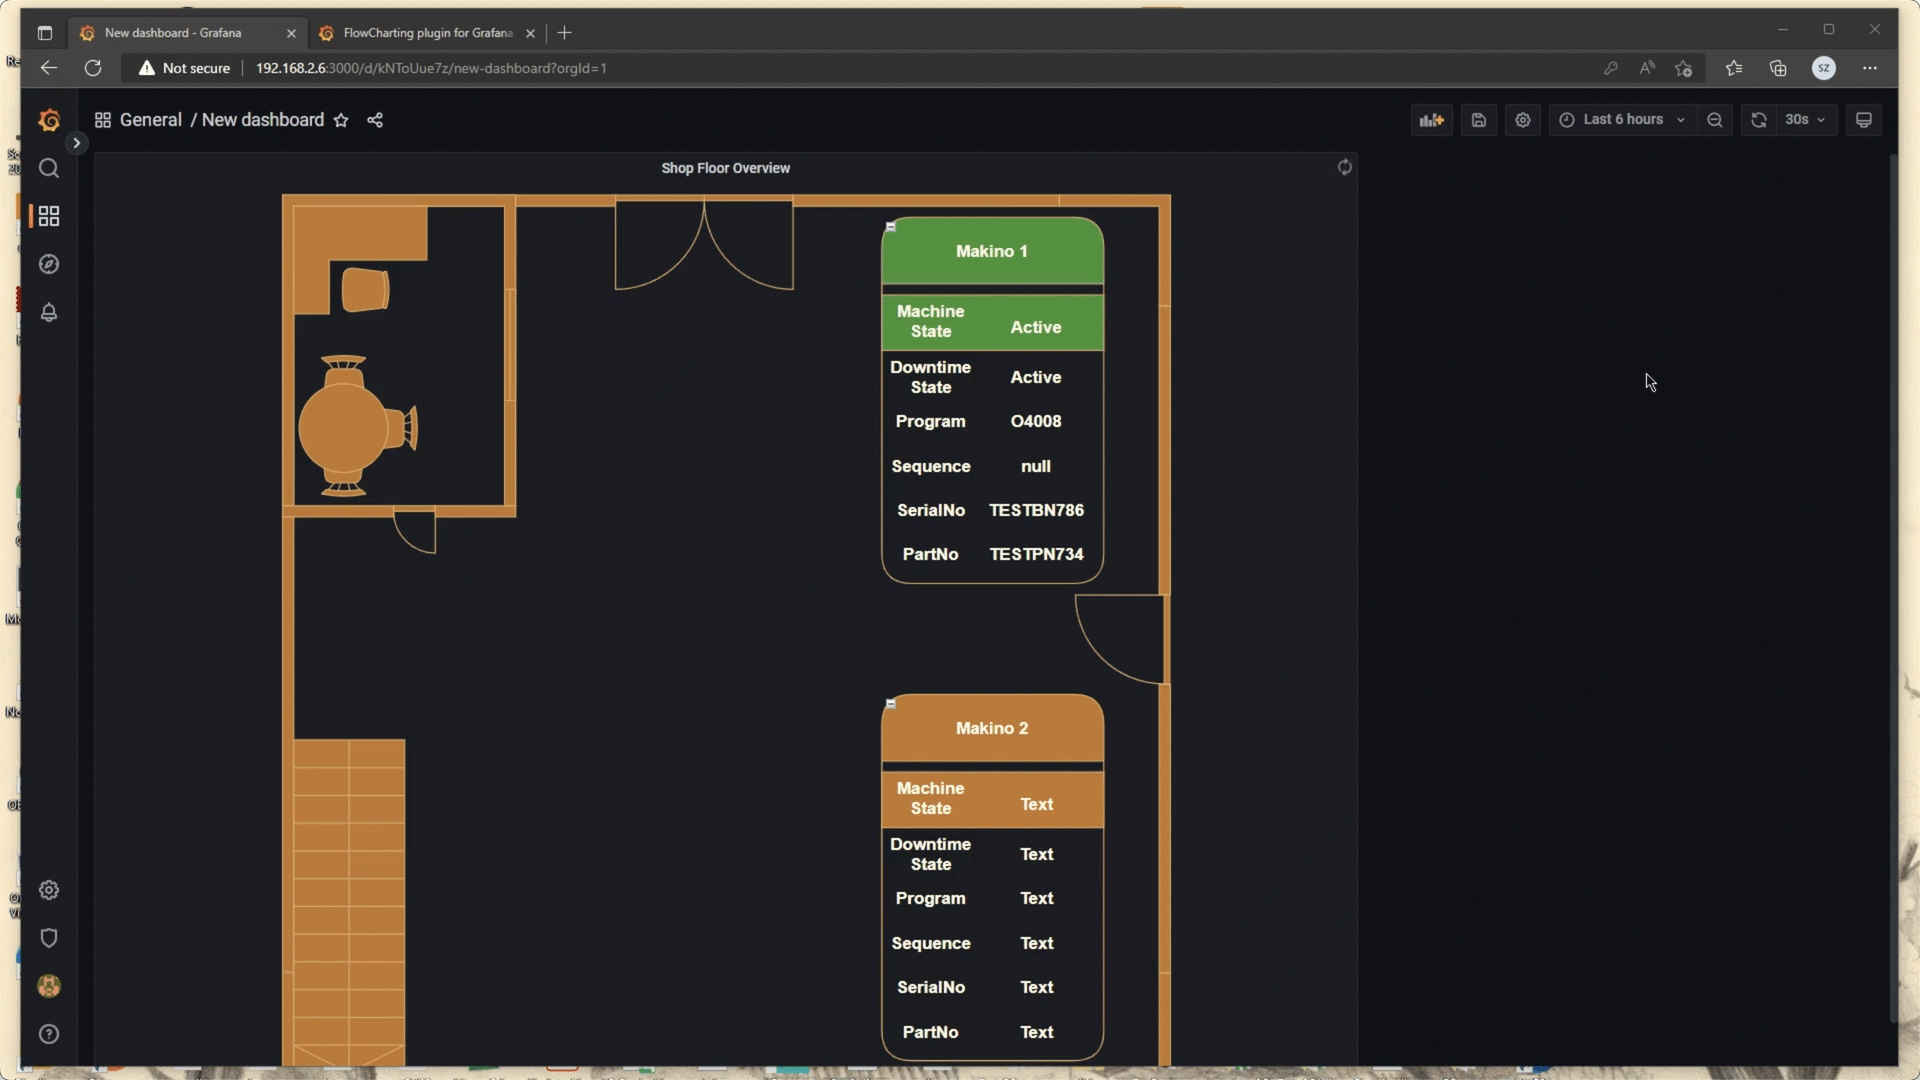 Update shapes in a diagram based on live data with draw.io, Grafana and the Flowcharting plugin